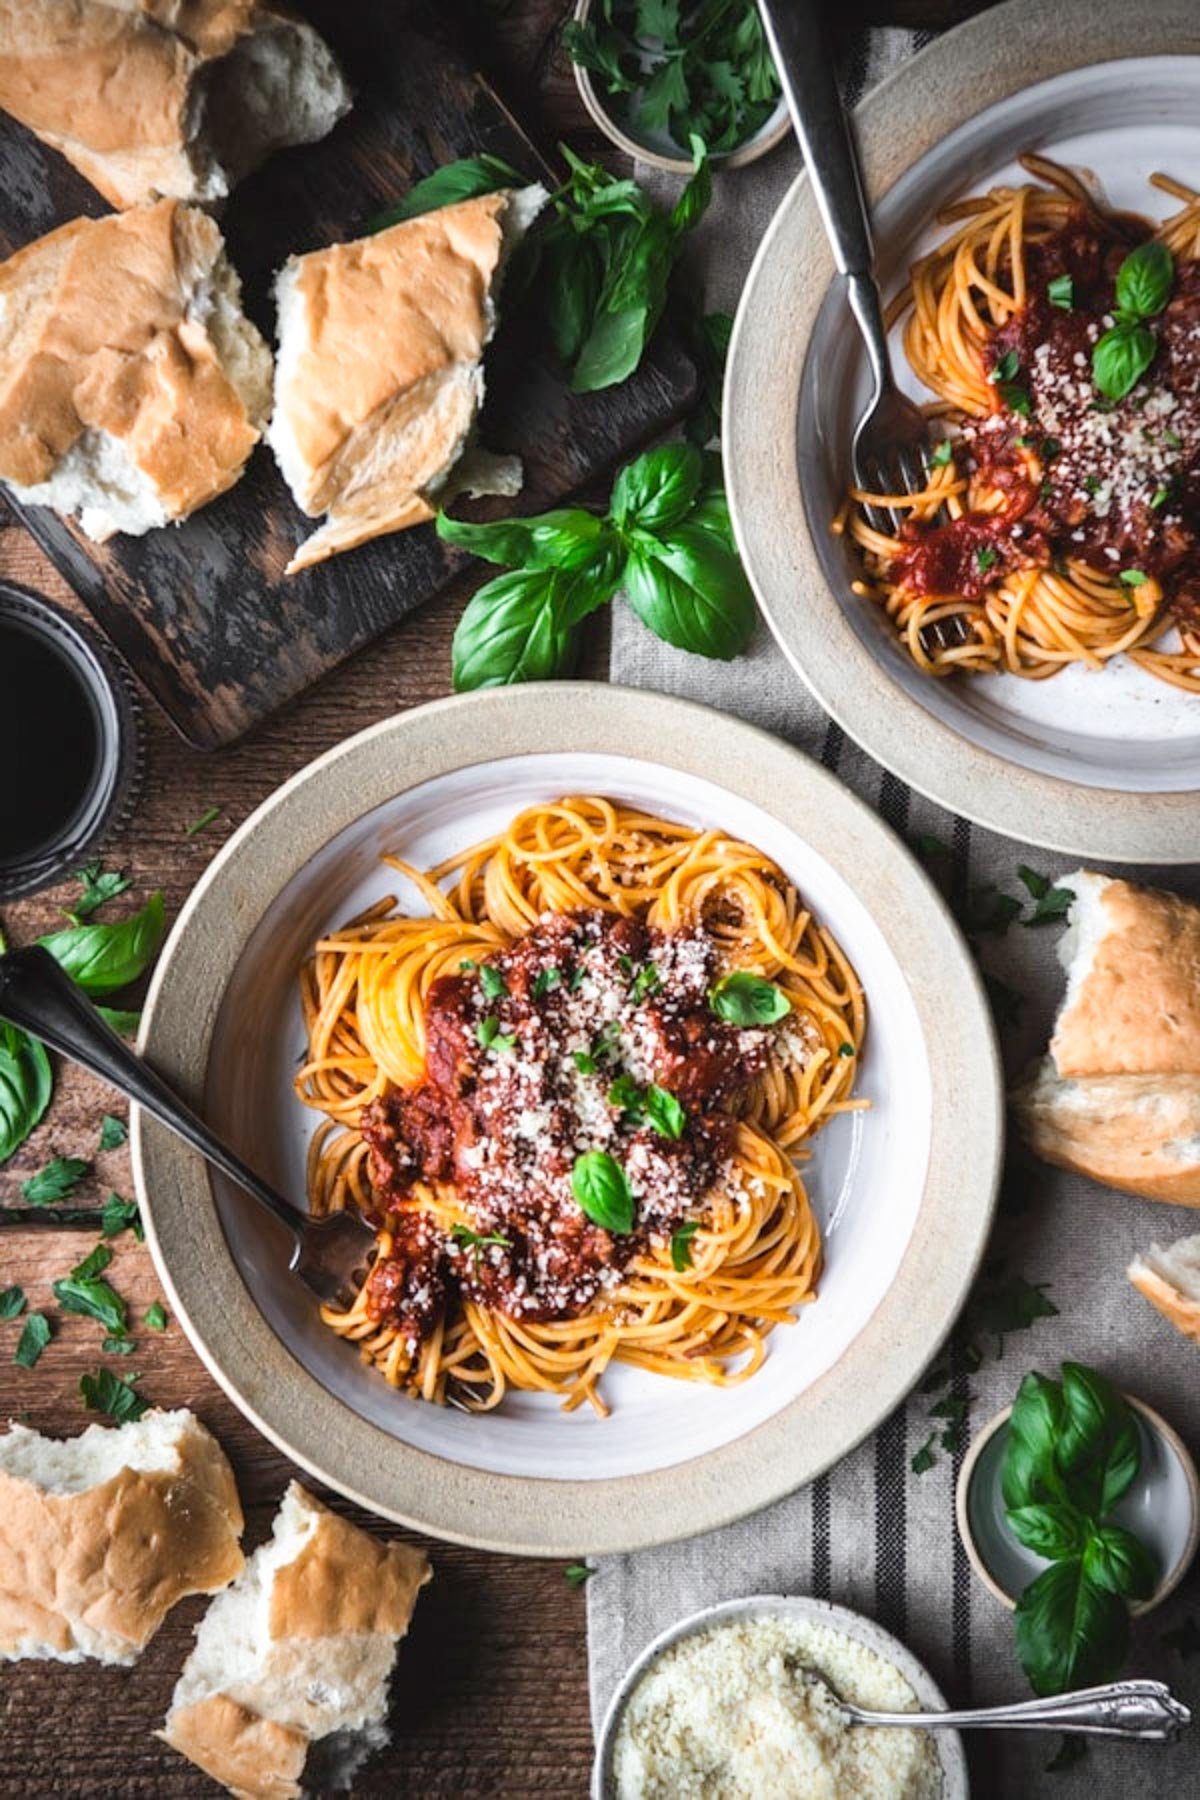 An overhead image of two bowls of spaghetti topped with a homemade spaghetti sauce and parmesan cheese. Pieces of bread, basil leaves, and bowls of grated parmesan cheese surround the bowls.